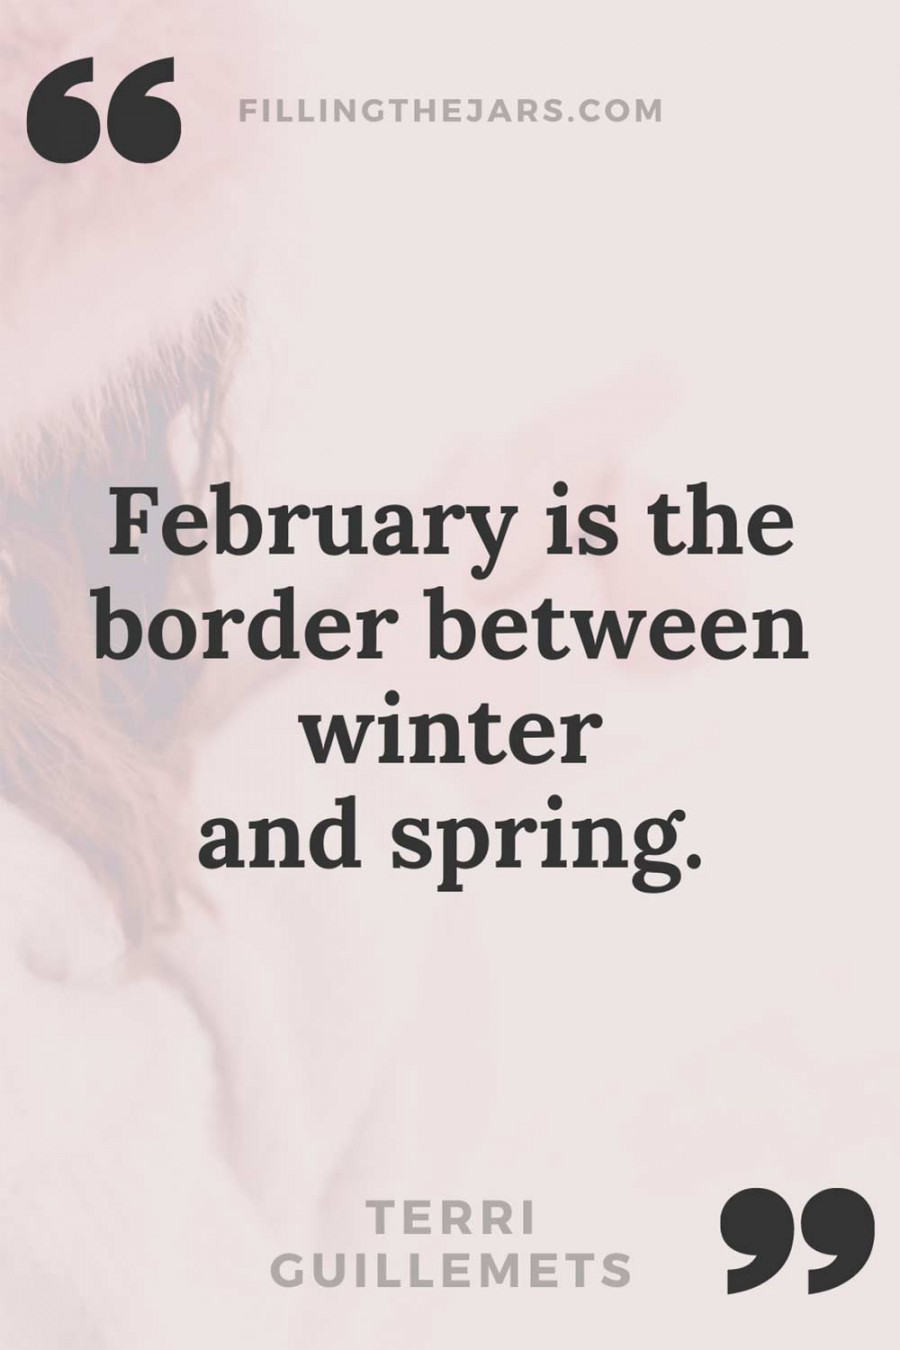 Best Inspirational Quotes for February  Filling the Jars